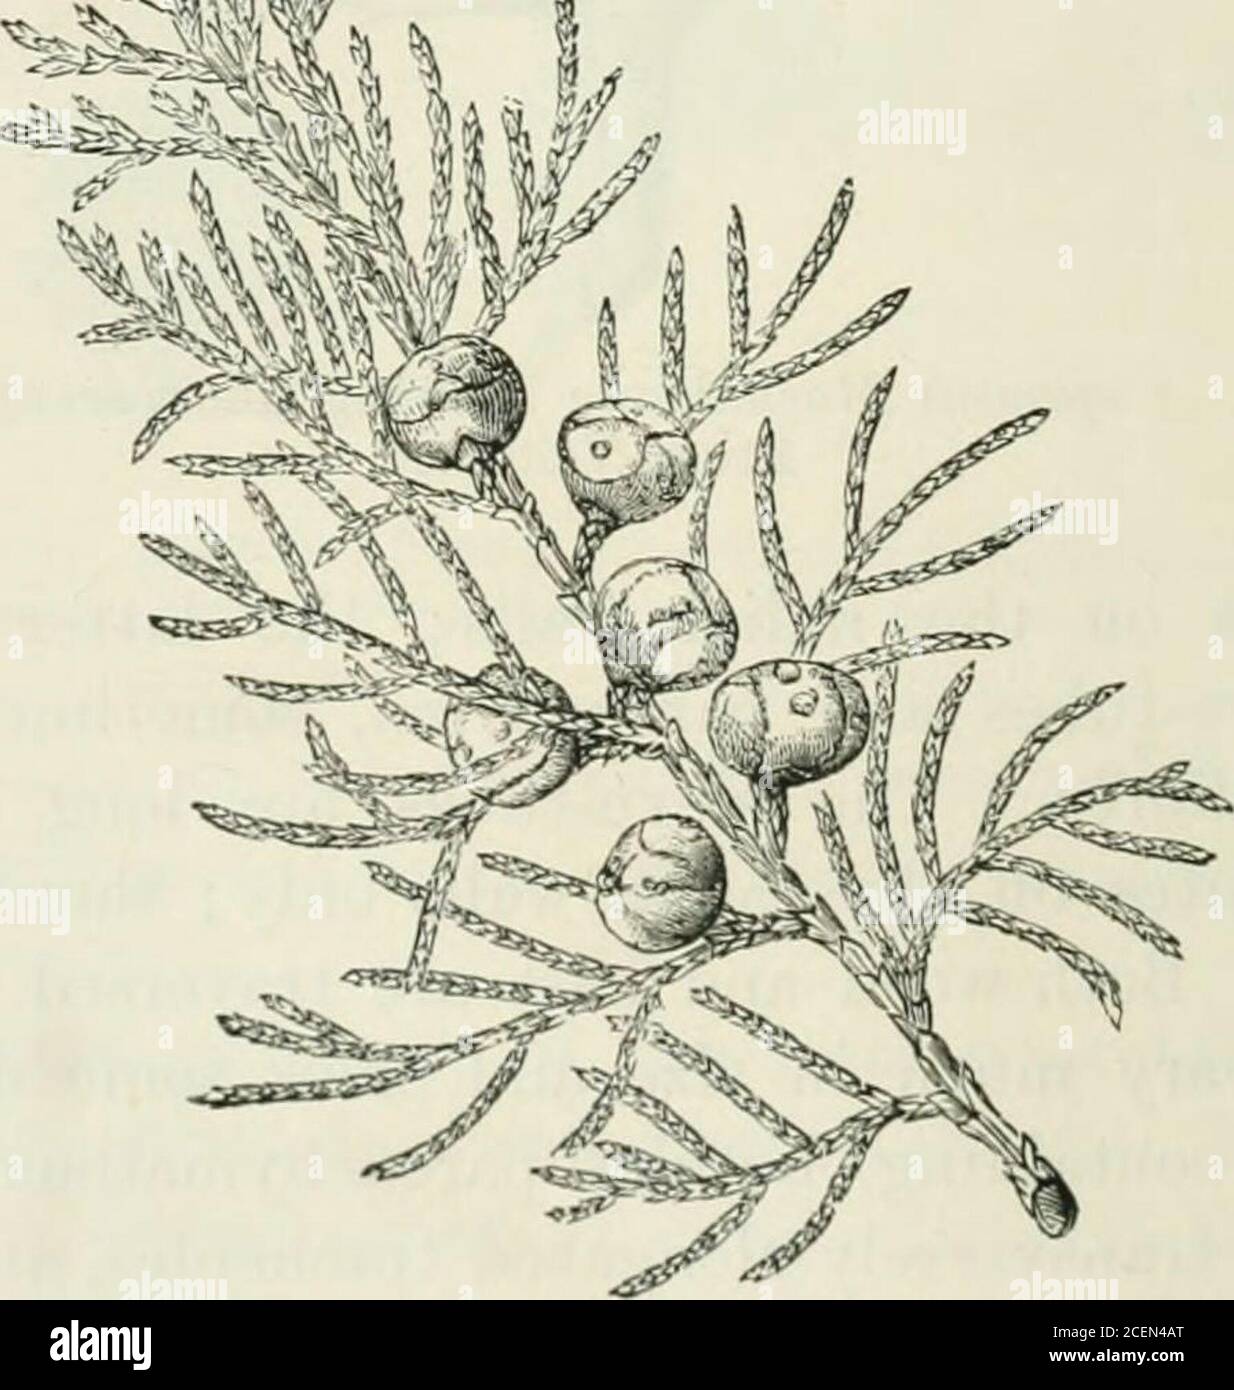 . The classification of flowering plants. Fig. 22. Juniperus drupacea with homomoiphic leaves in whorls of three. From Veitch.. Fig. 23. Juniperus thurifcra, a heteromorphic species shewing concrescentsquamiform leaves in decussate pairs characteristic of the adult shoots;on younf, plants and vigorous shoots of older ones the leaves are acicularand in whorls of three as in J. drupacea. From Veitch. Ill] CONIFERAE 85 communicating by pits with the sieve-tubes, and known asalbuminous cells. They probably correspond functionally withthe companion-cells of Angiosperms. The tracheides formed toward Stock Photo